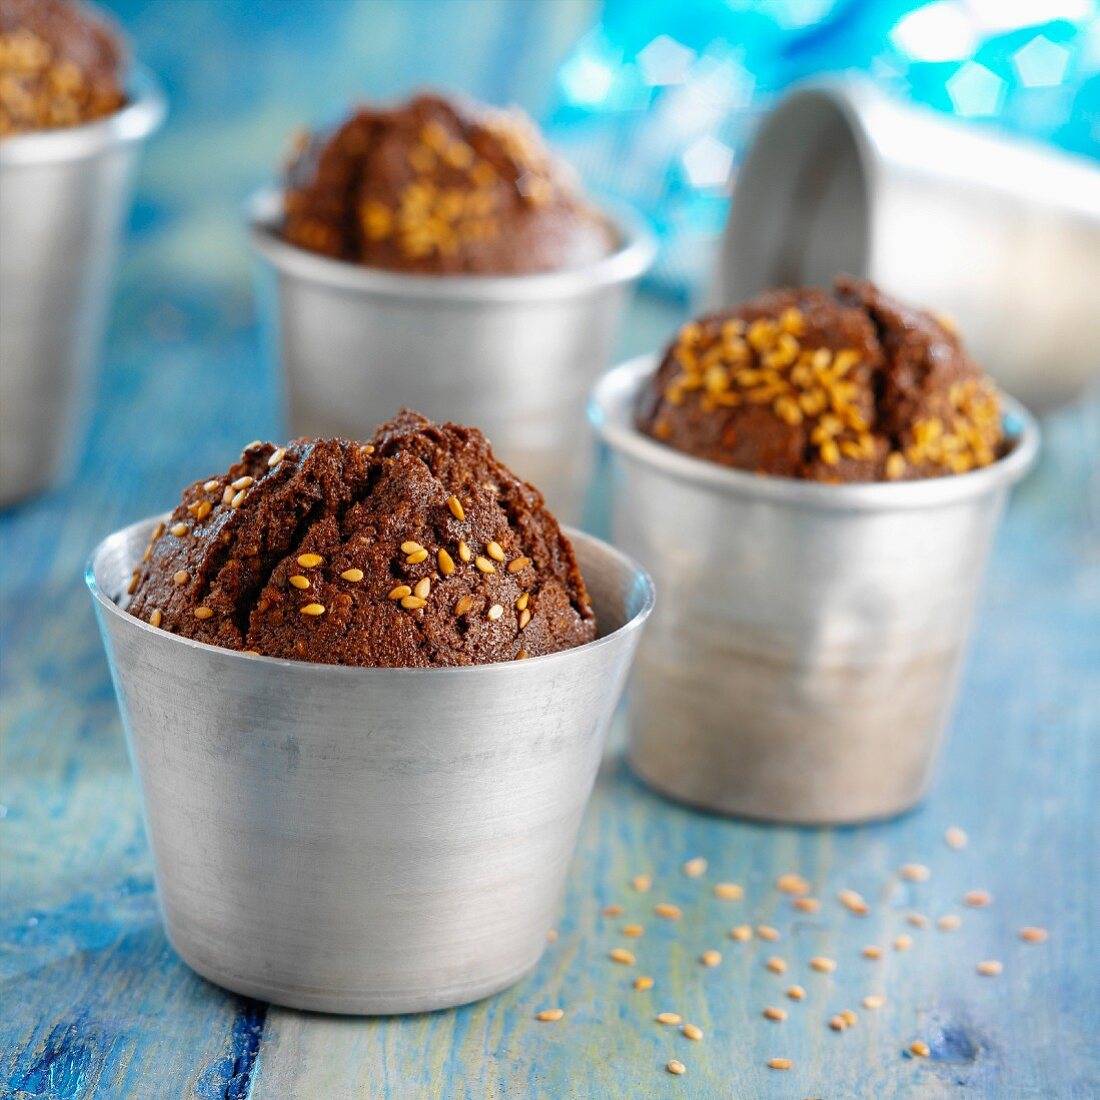 Chocolate and sesame seed muffins